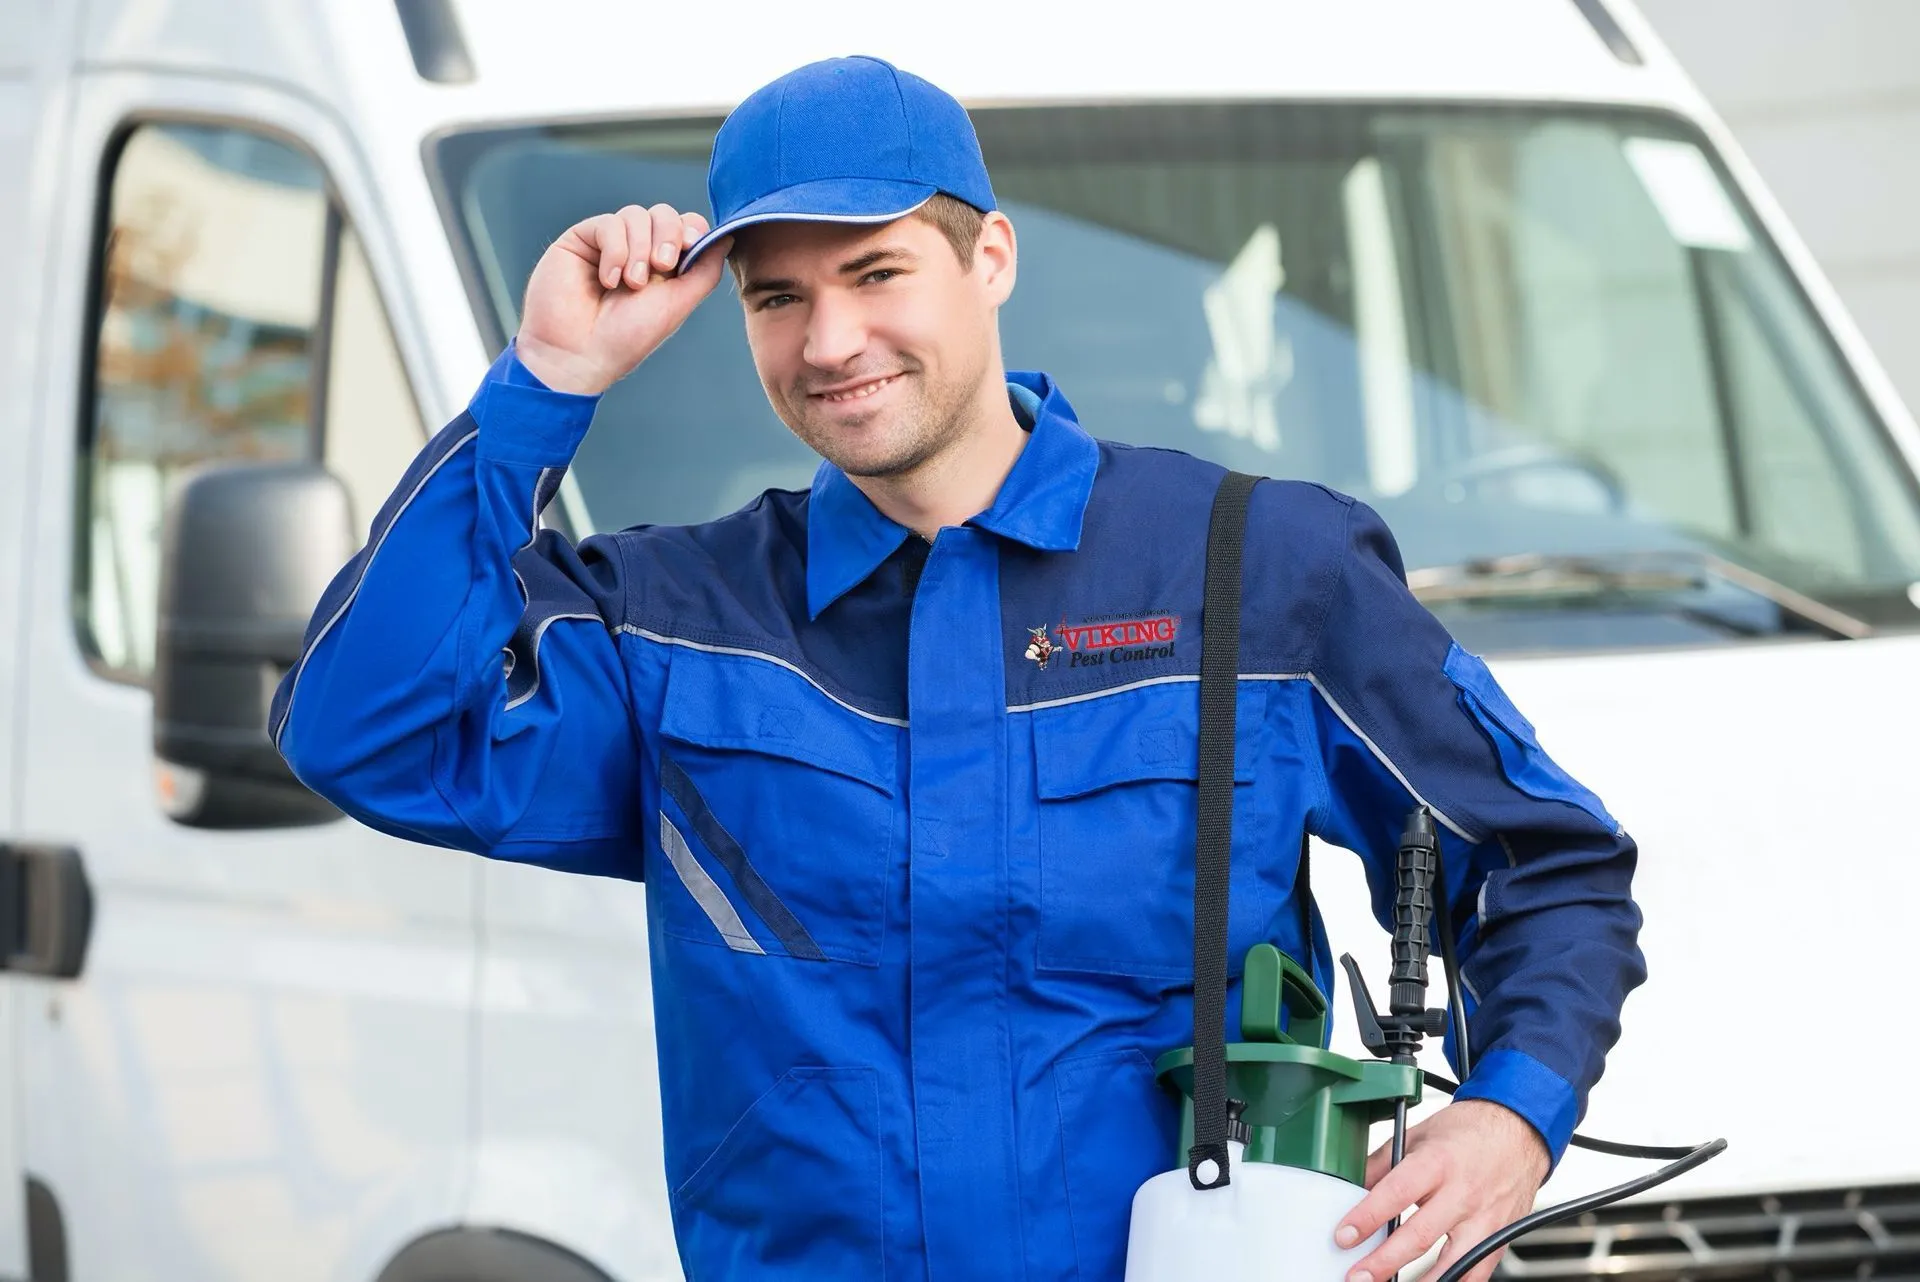 Sydney Pest Control Experts - Fast, Efficient, and Affordable